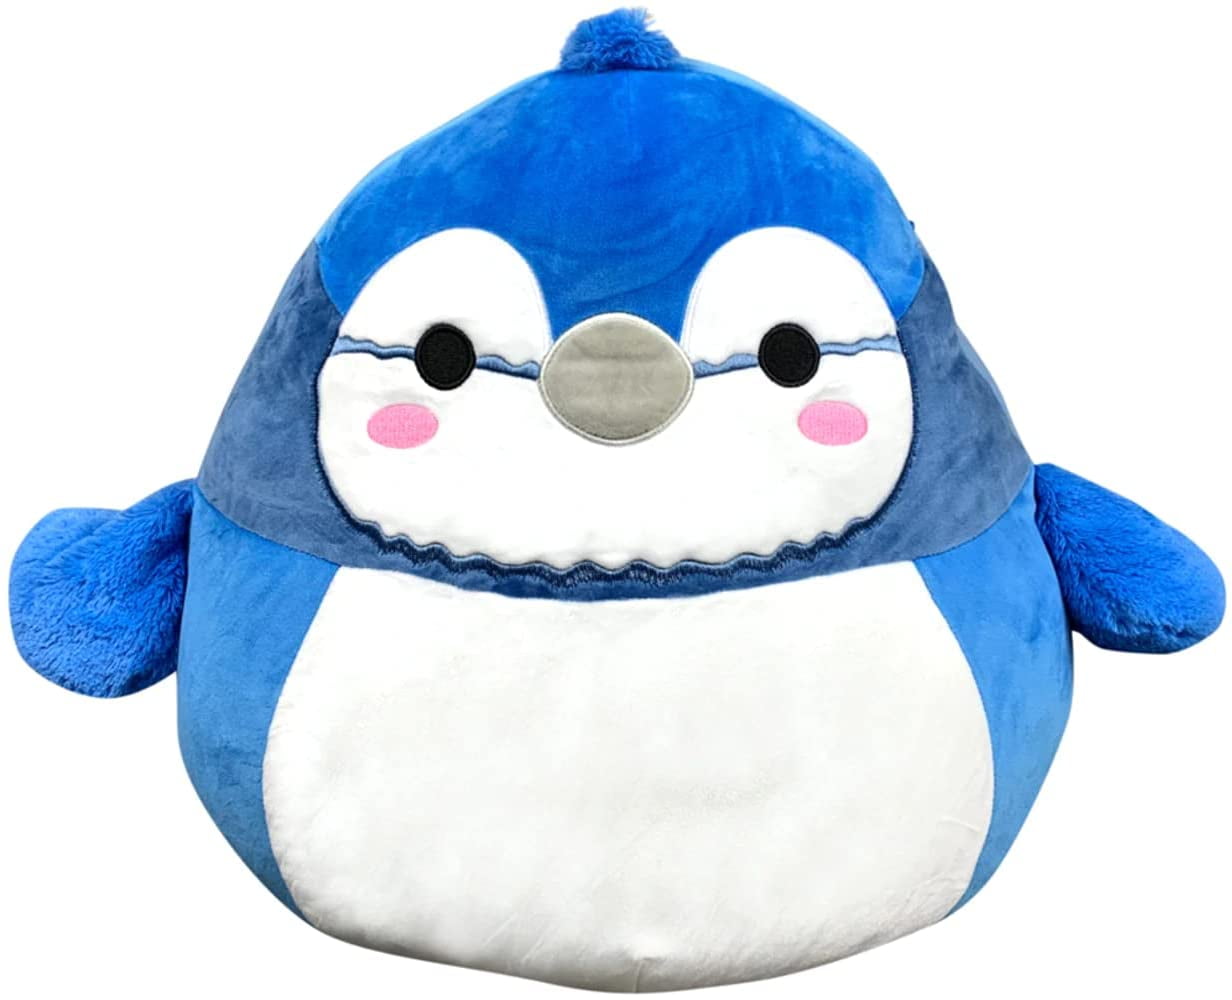 Squishmallow BABS Blue Jay 8 inch Official Kellytoy Soft Squishy ...